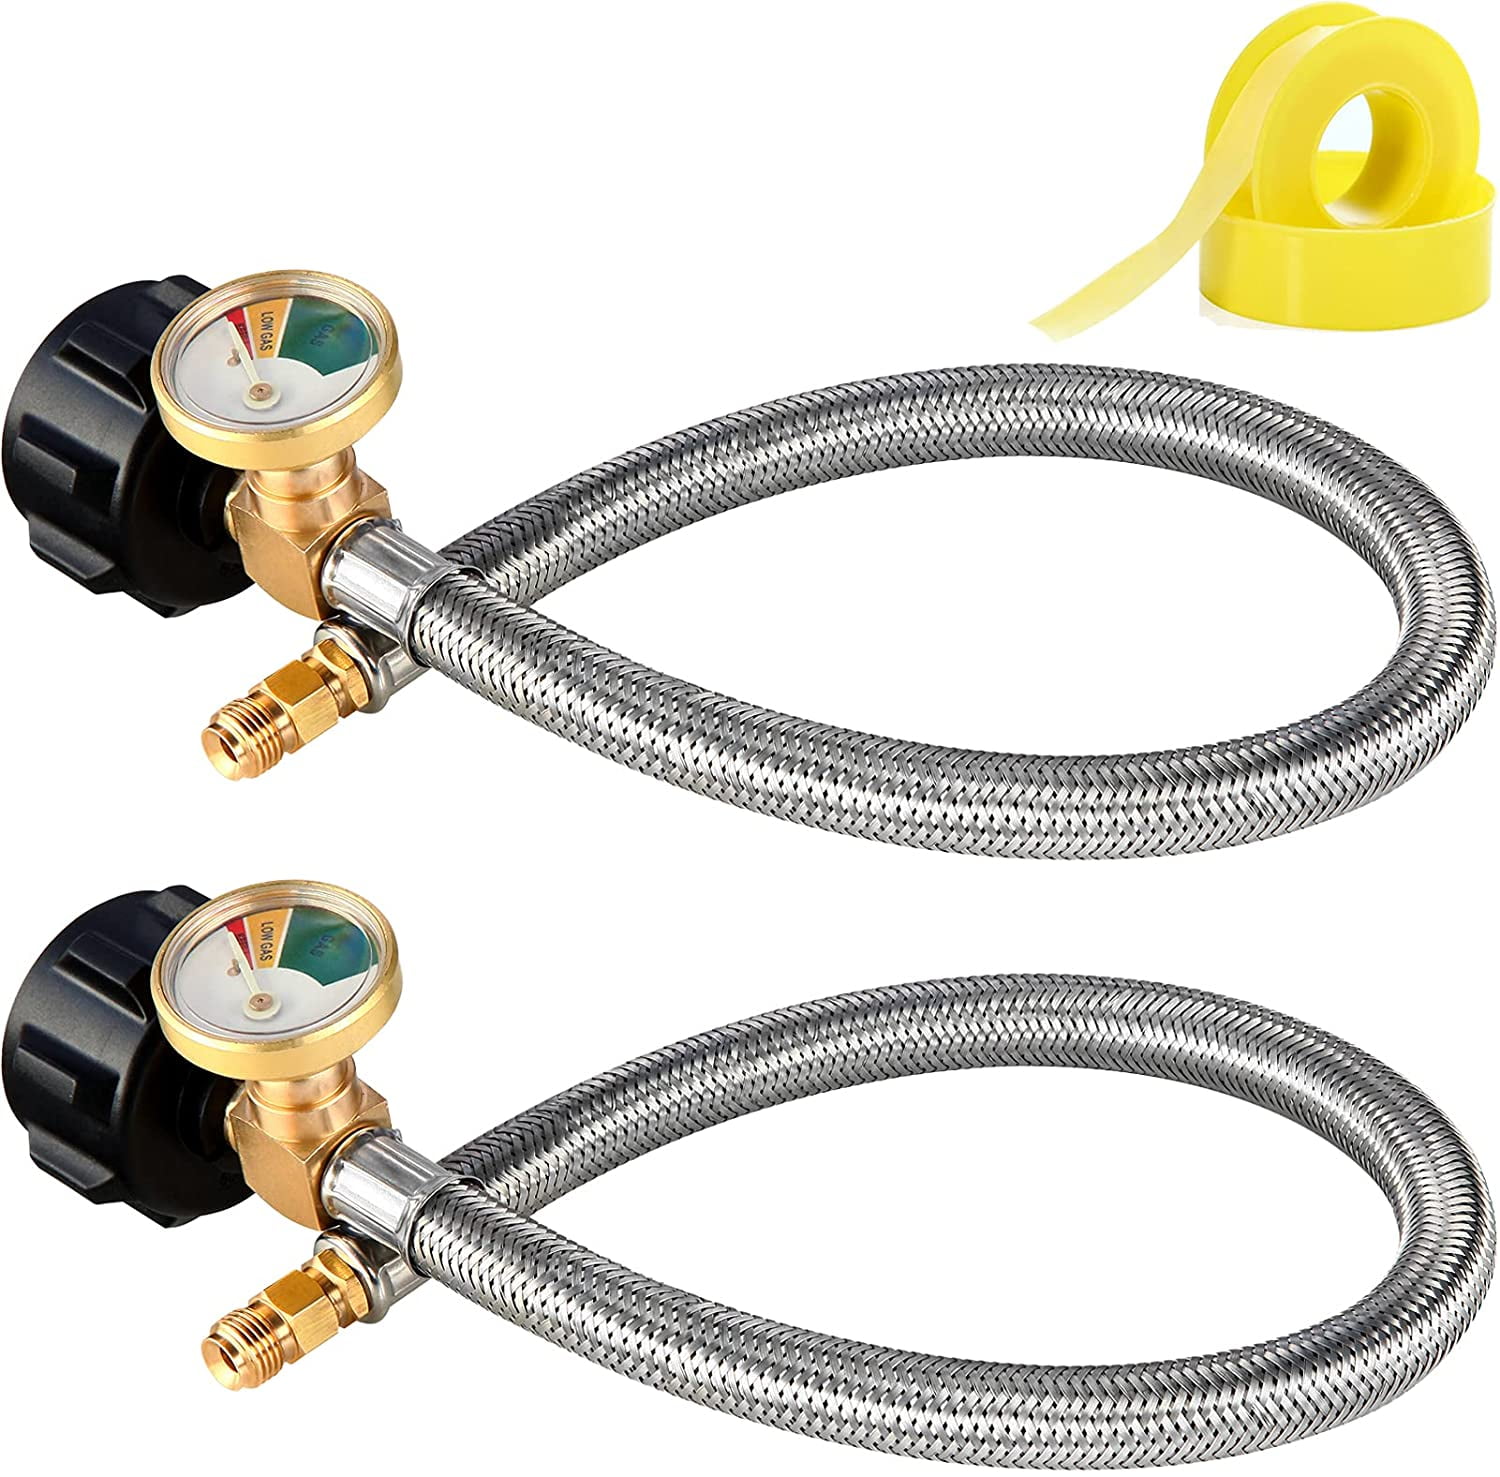 2 Stage Hose Propane Regulator Adapter Connect Flat Gas Tank Camping Stove 